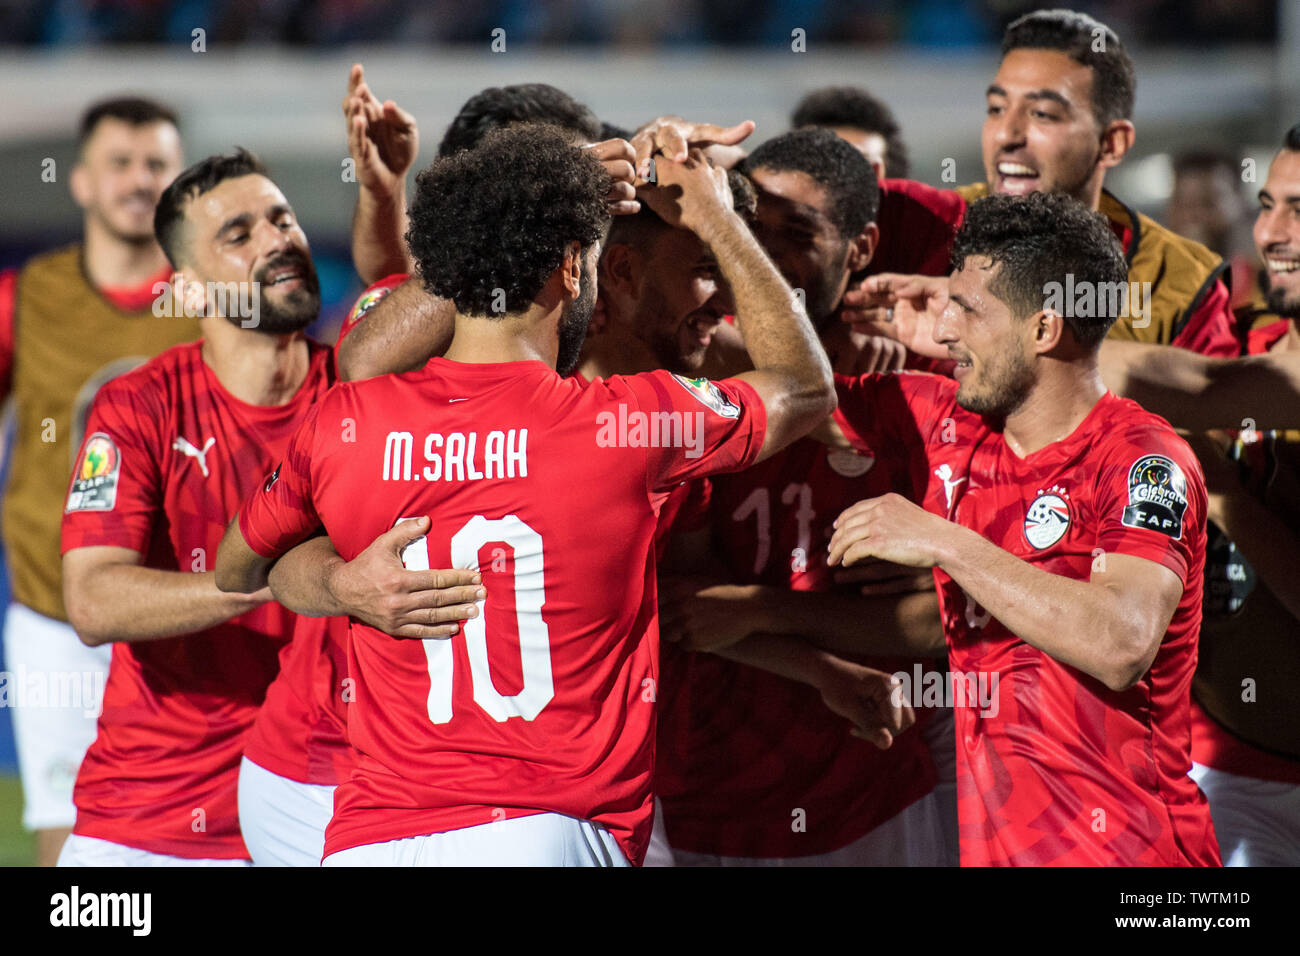 CAIRO, EGYPT - JUNE 21: Mahmoud Hassan Trezeguet of Egypt celebrate with his team mates Ayman Ashraf Elsayed, Mohamed Elneny, Marwan Mohsen Fahmy Tarwat, Mohamed Salah and Abdallah Bekhit after scoring goal during the 2019 Africa Cup of Nations Group A match between Egypt and Zimbabwe at Cairo International Stadium on June 21, 2019 in Cairo, Egypt. (Photo by Sebastian Frej/MB Media) Stock Photo